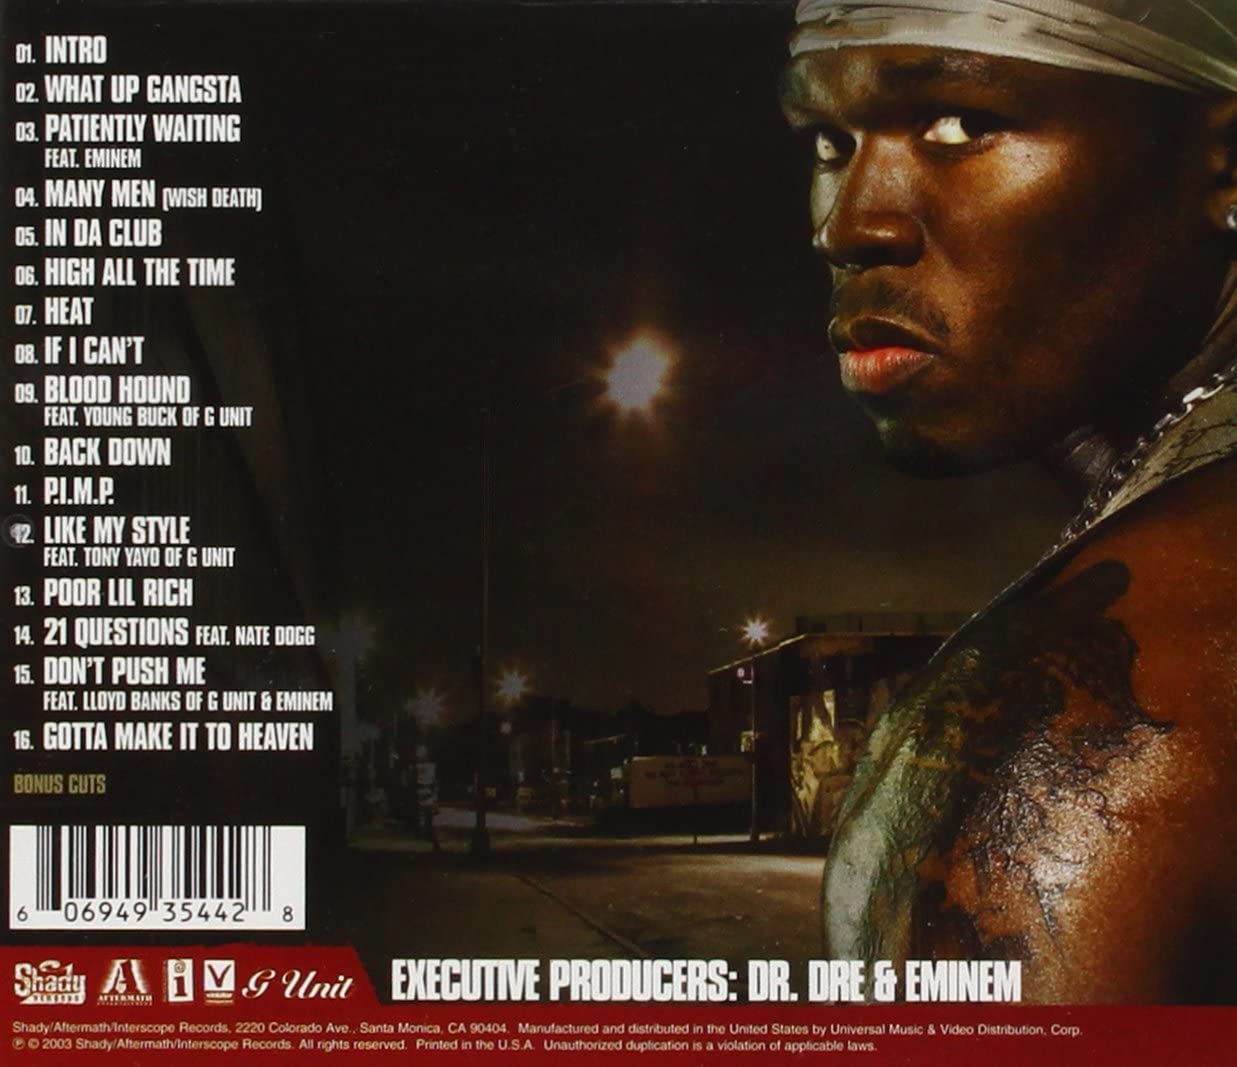 Get Rich Or Die Tryin [Audio CD] 50 CENT